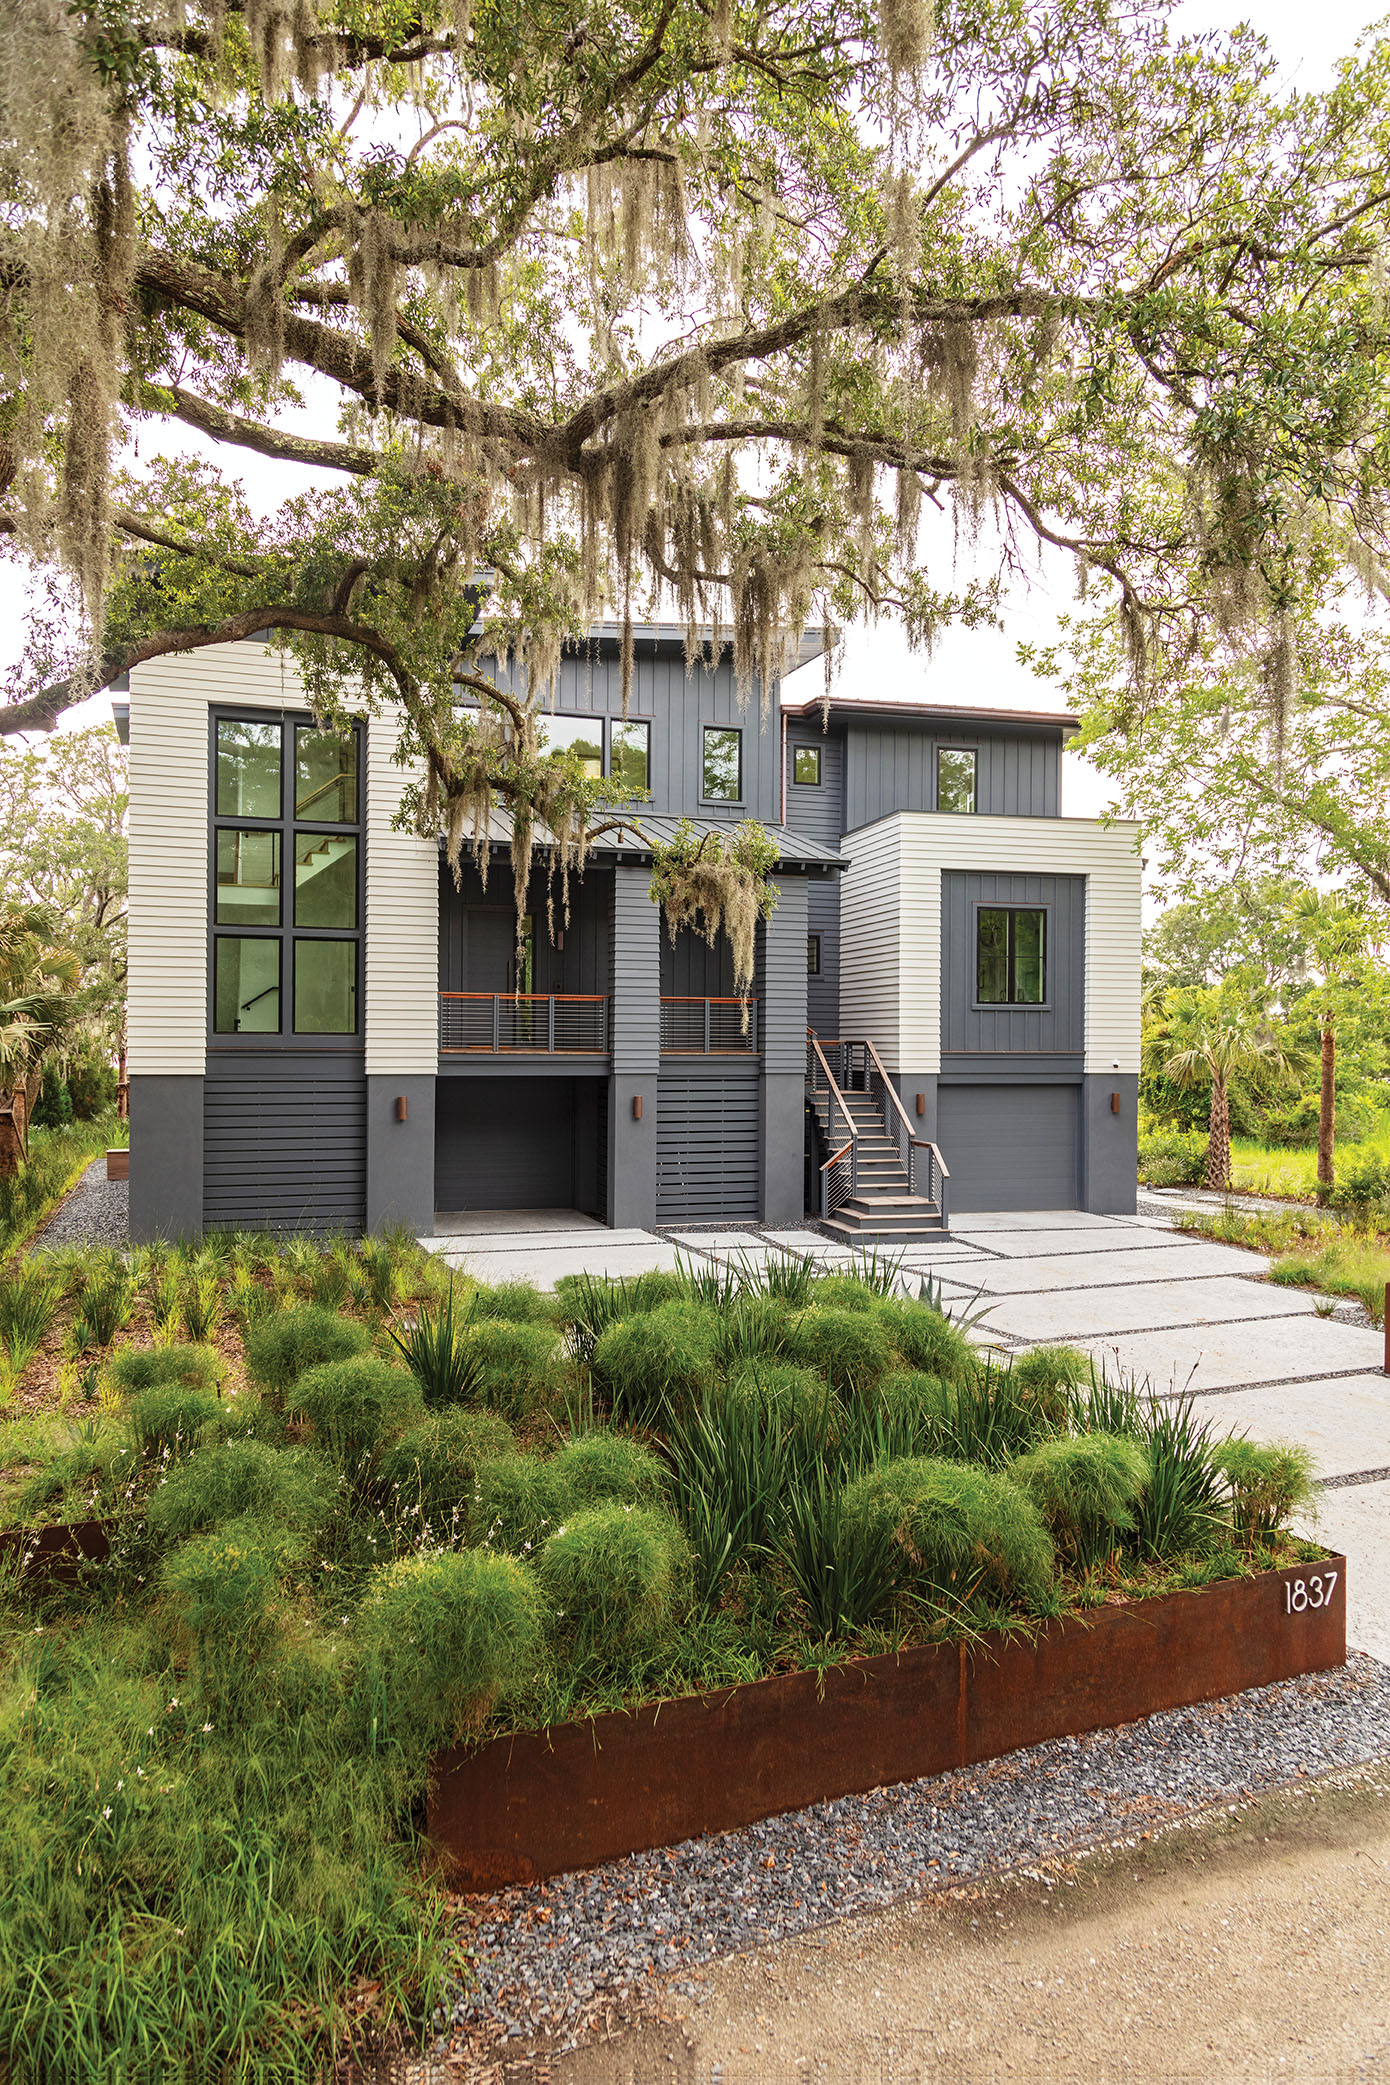 Landscape architects Remark helped blend the home into its natural surroundings with a selection of native plants.